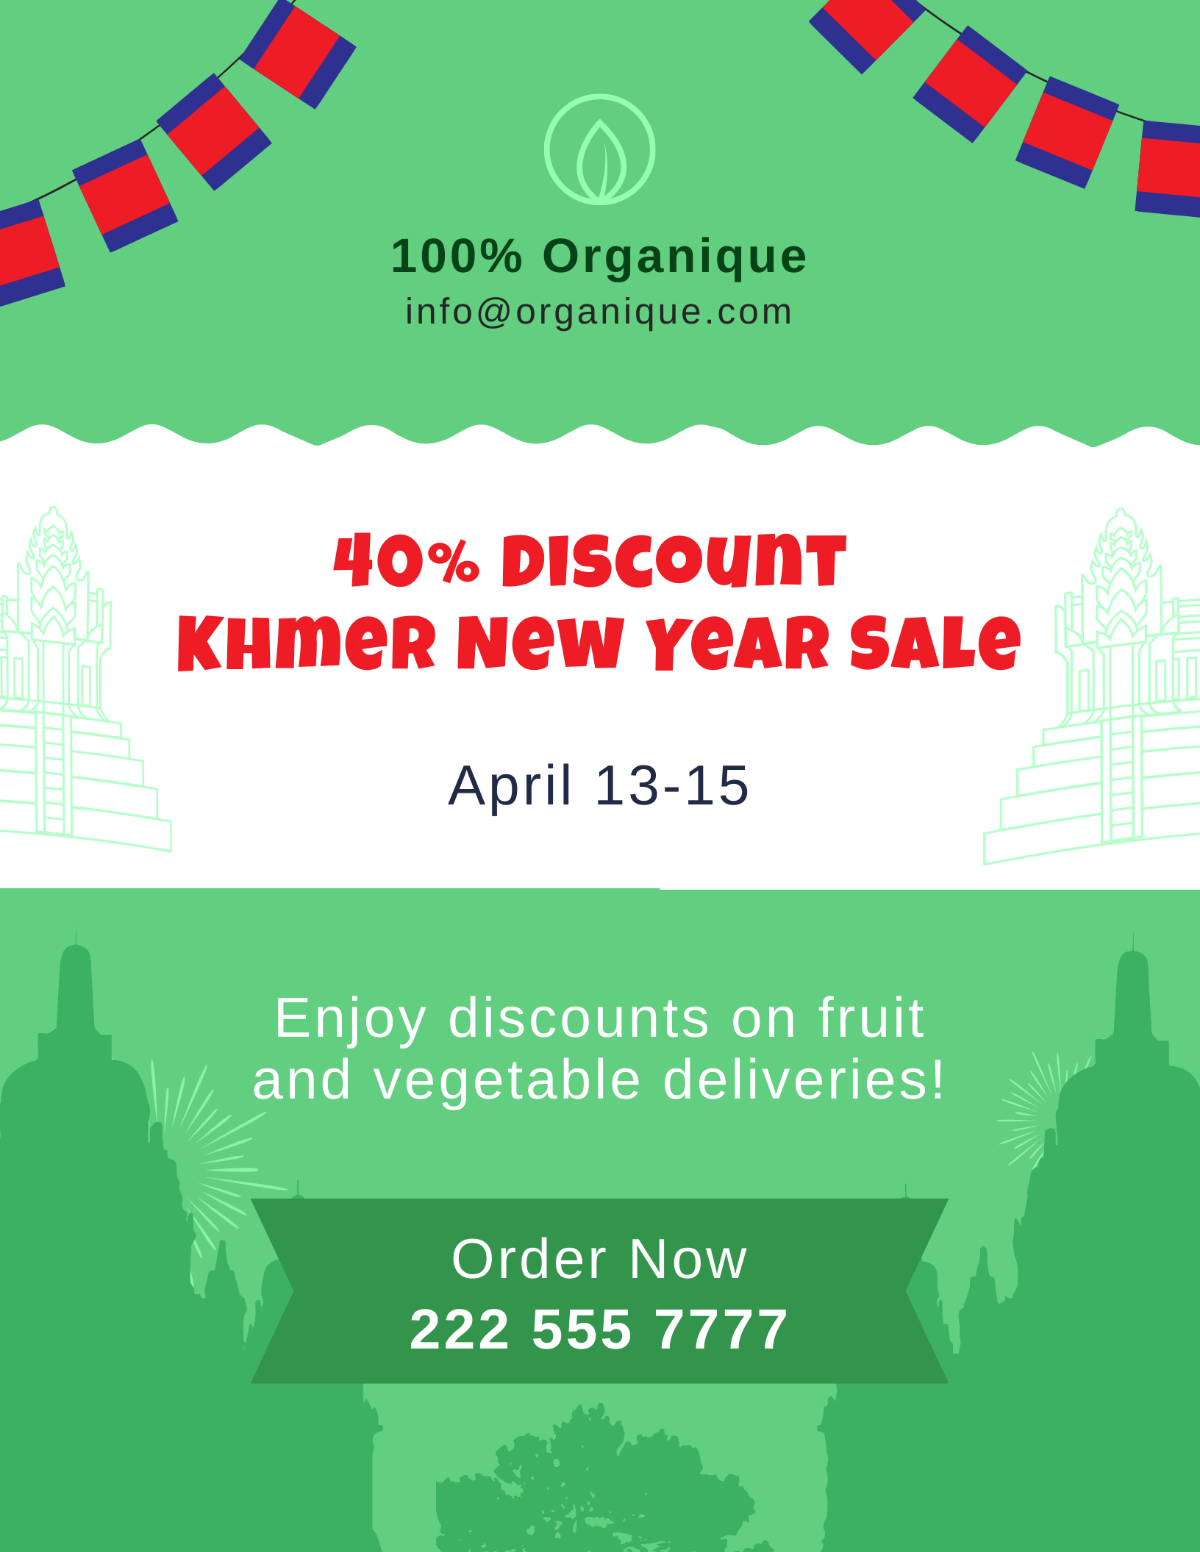 Free Khmer New Year Sale Template